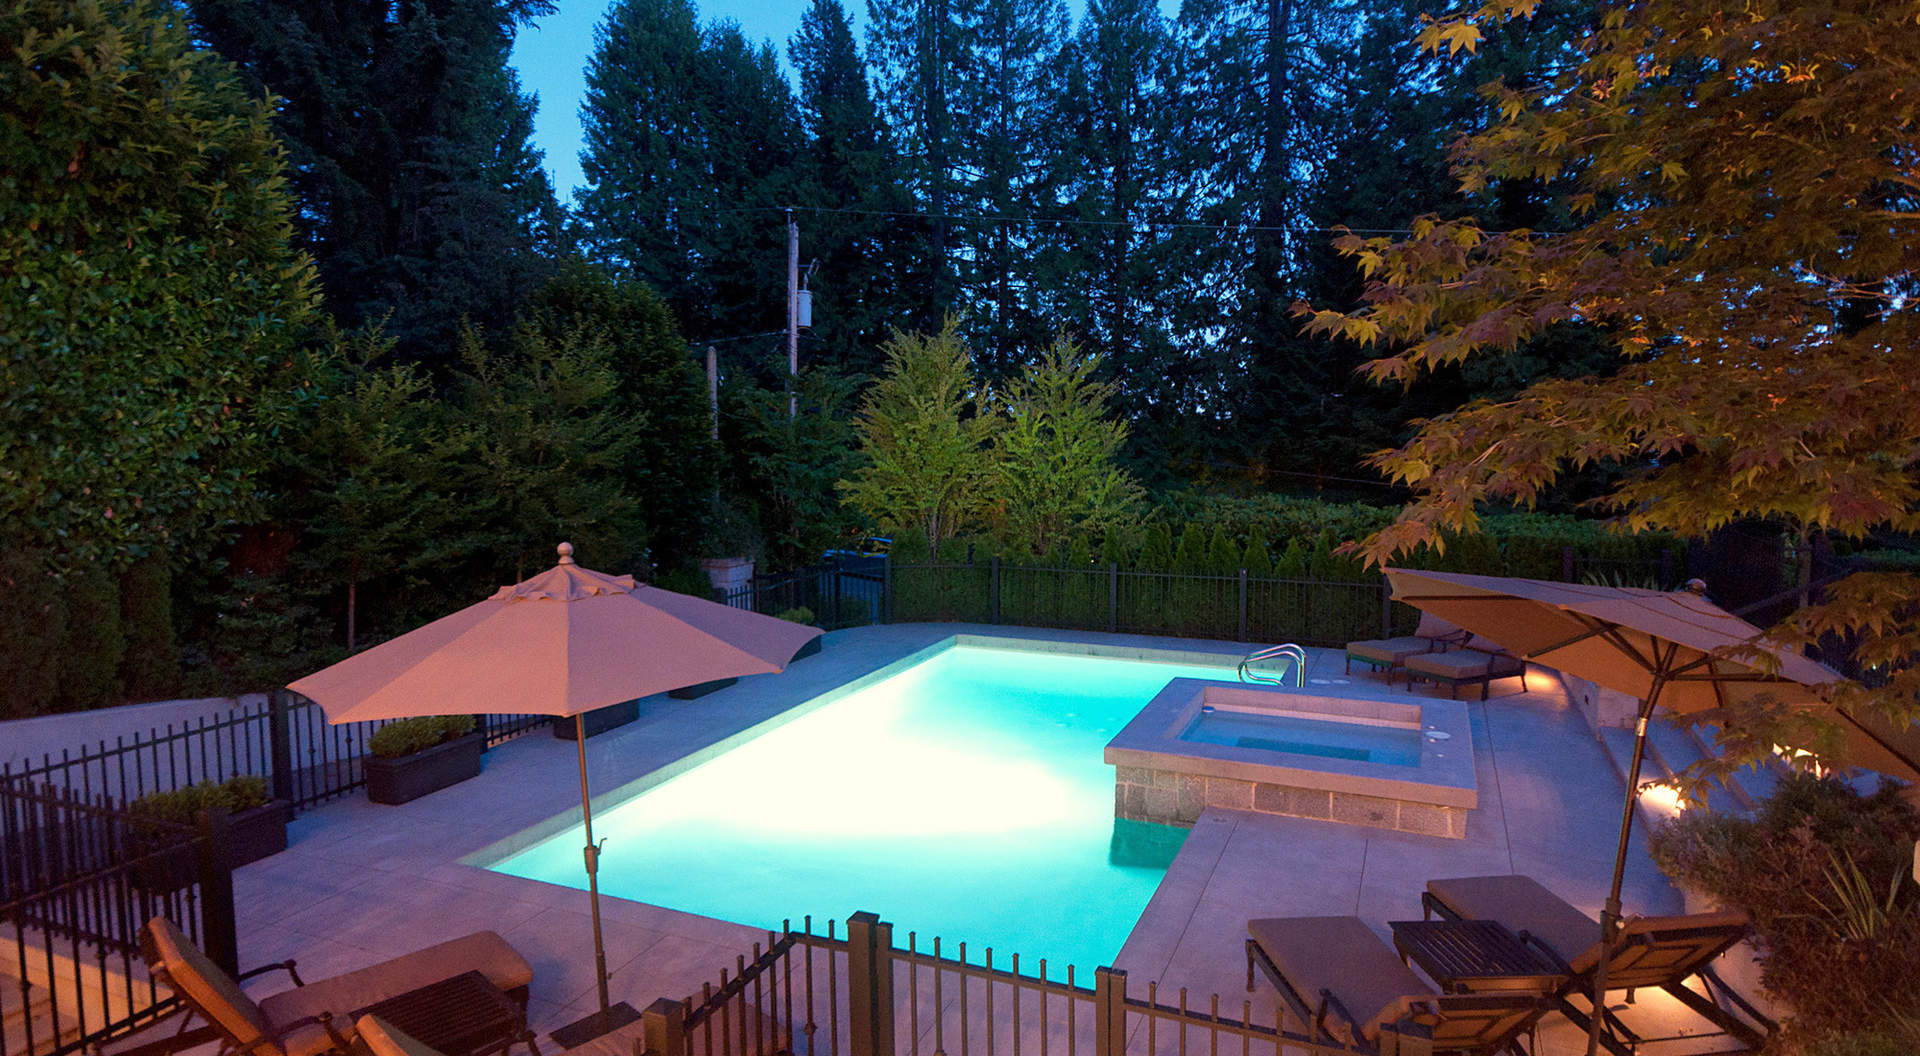 South Facing Outdoor Pool at Twilight